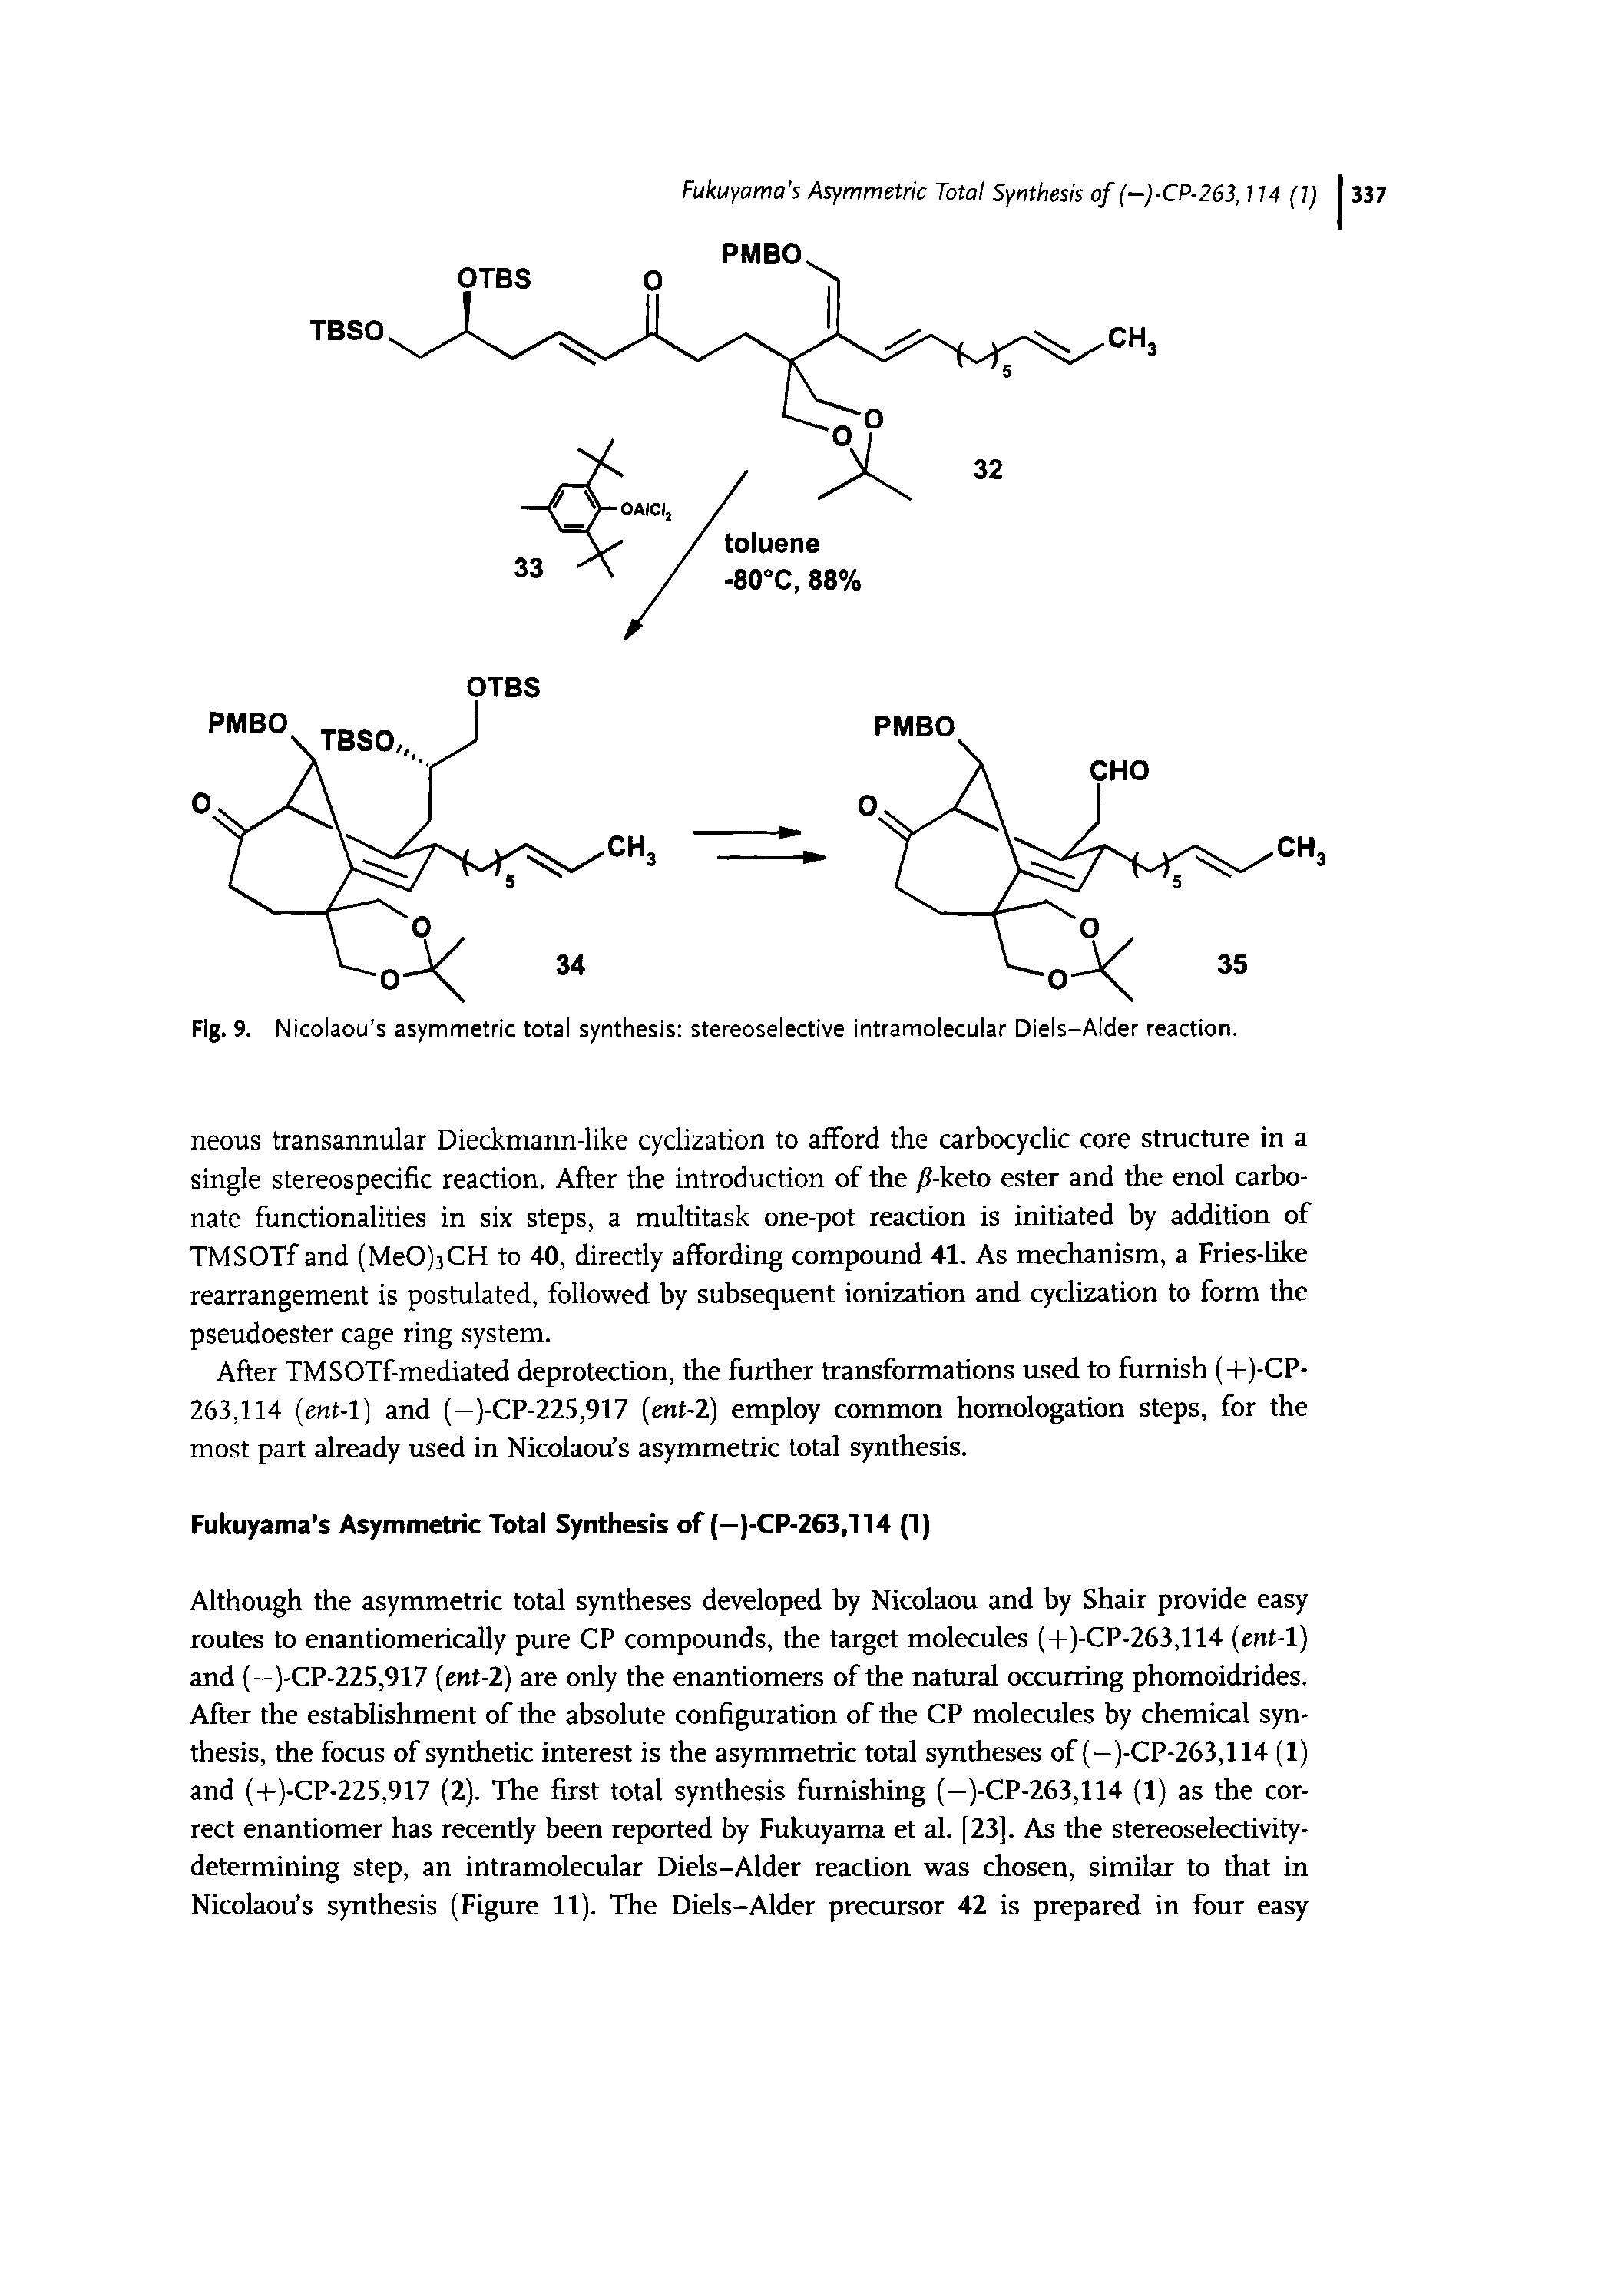 Fig. 9. Nicolaou s asymmetric total synthesis stereoselective intramolecular Diels-Alder reaction.